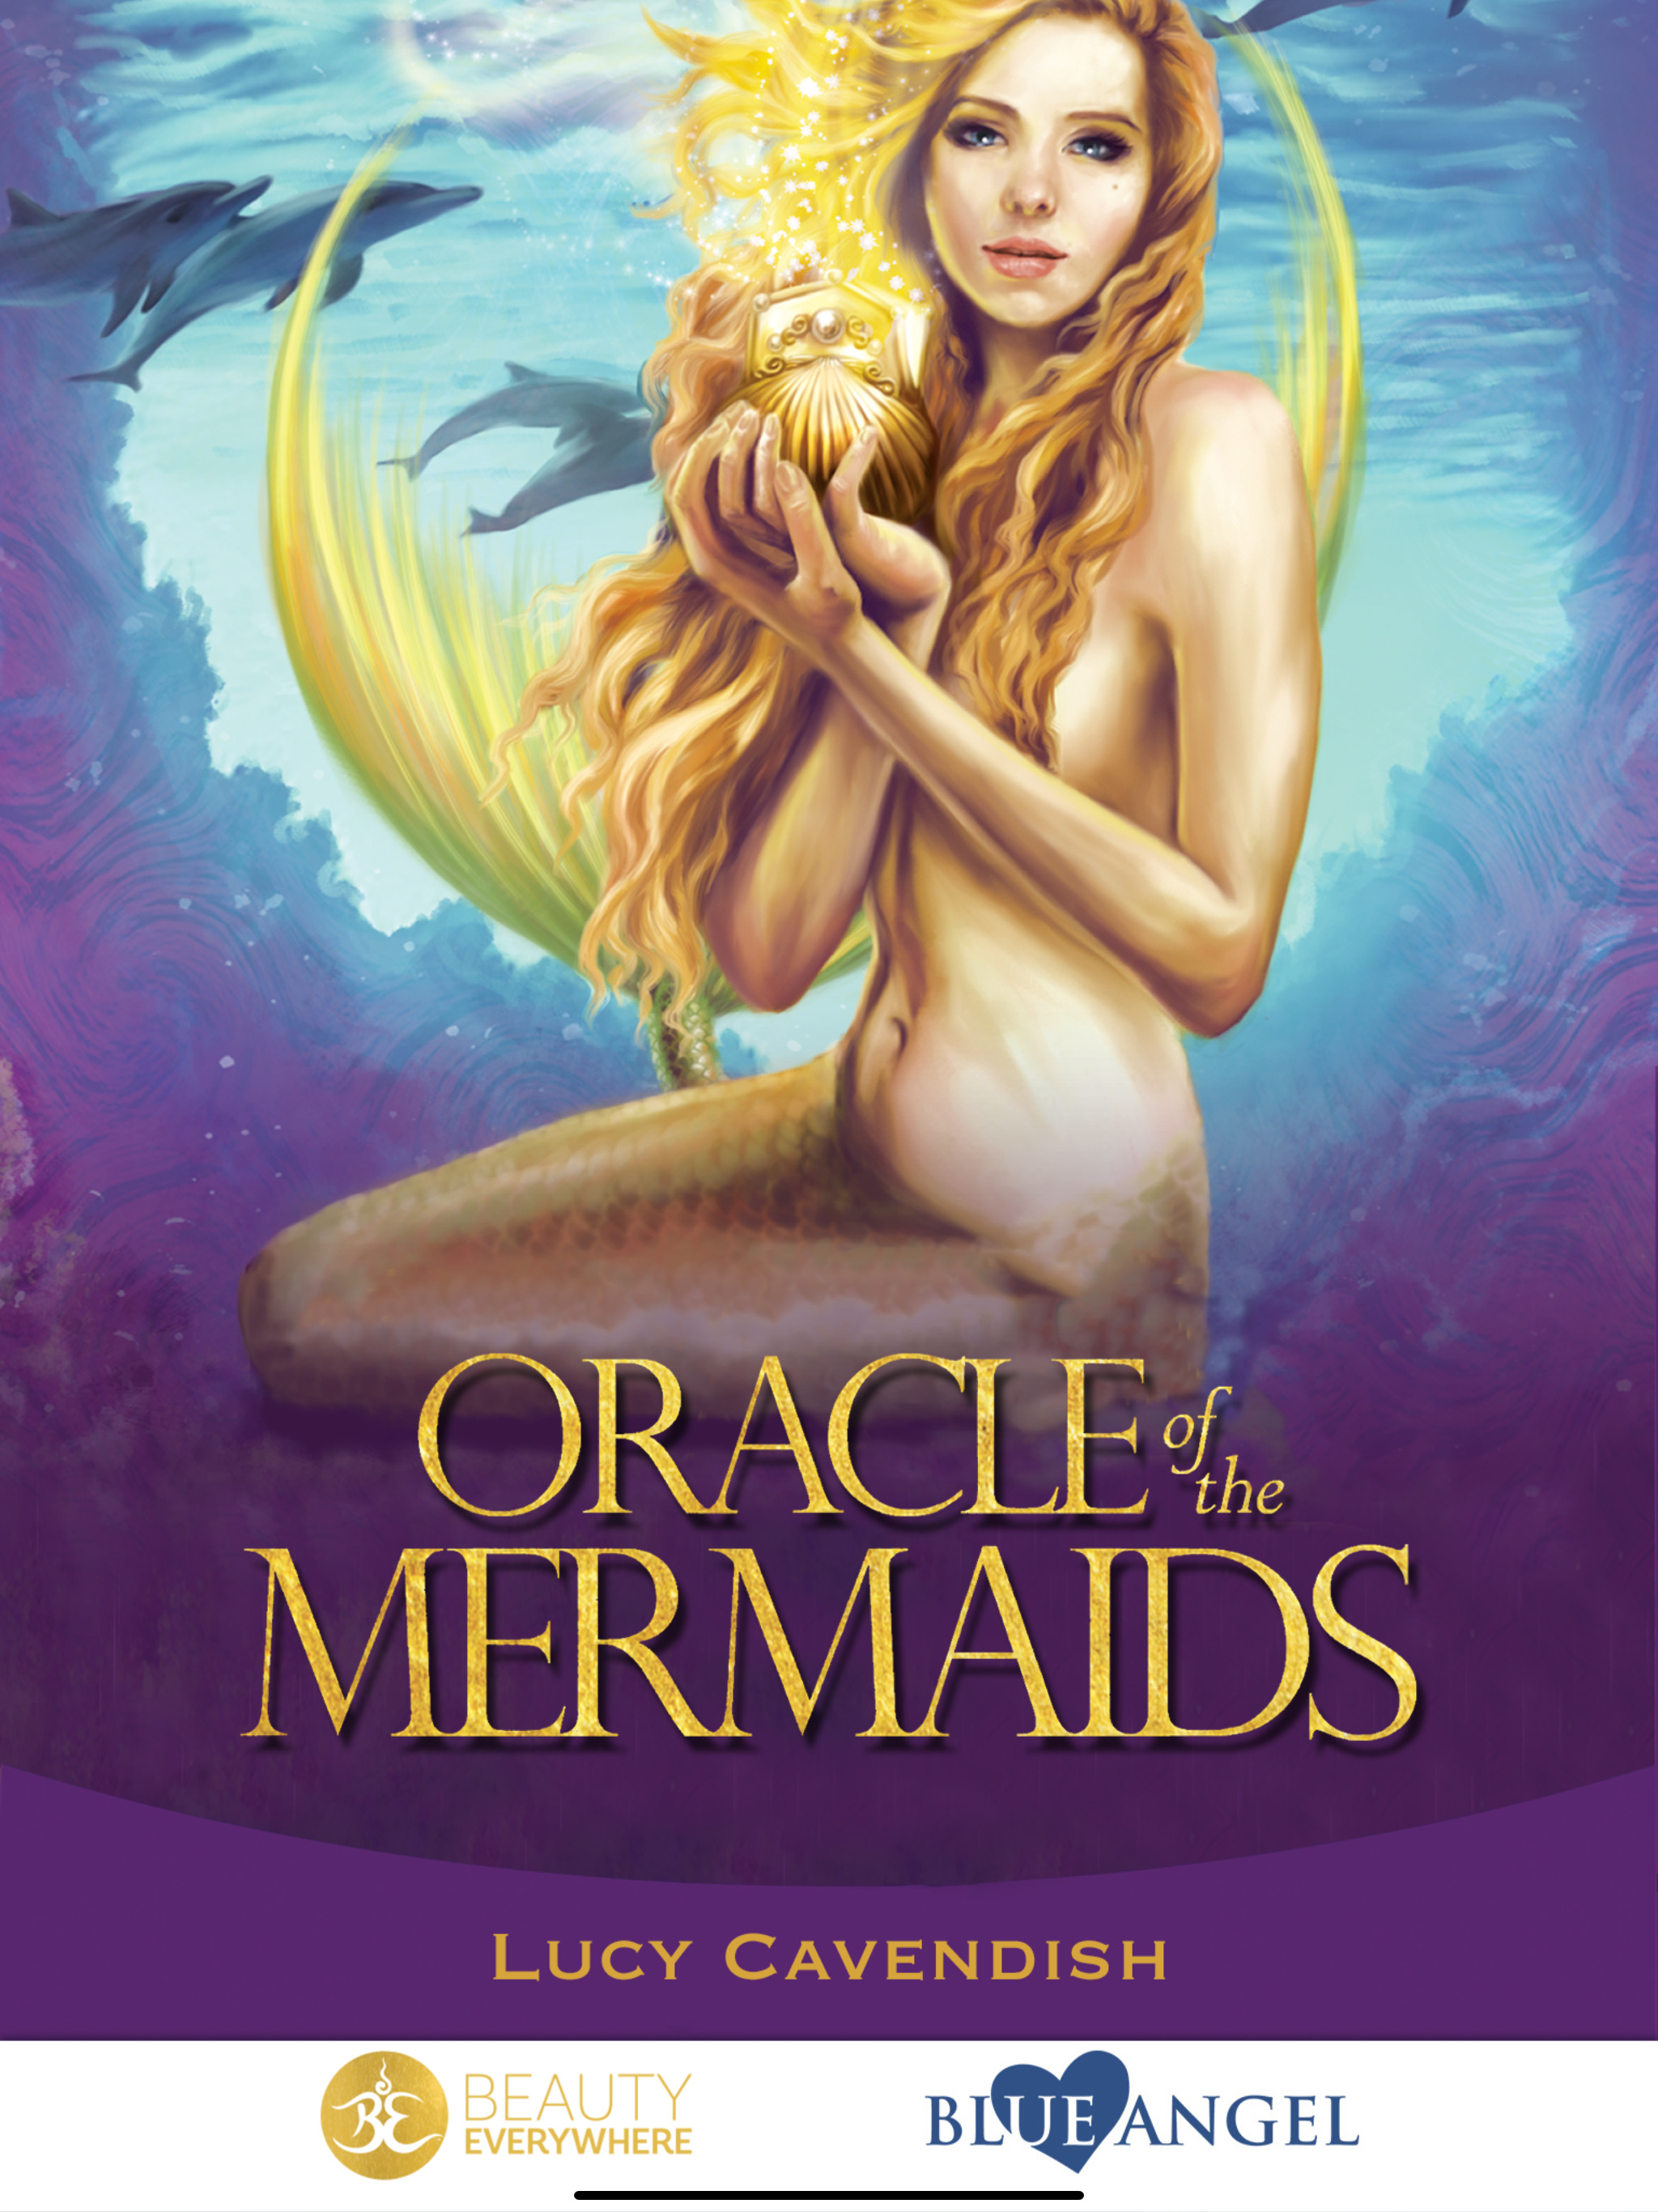 Oracle of Mermaids by Lucy Cavendish